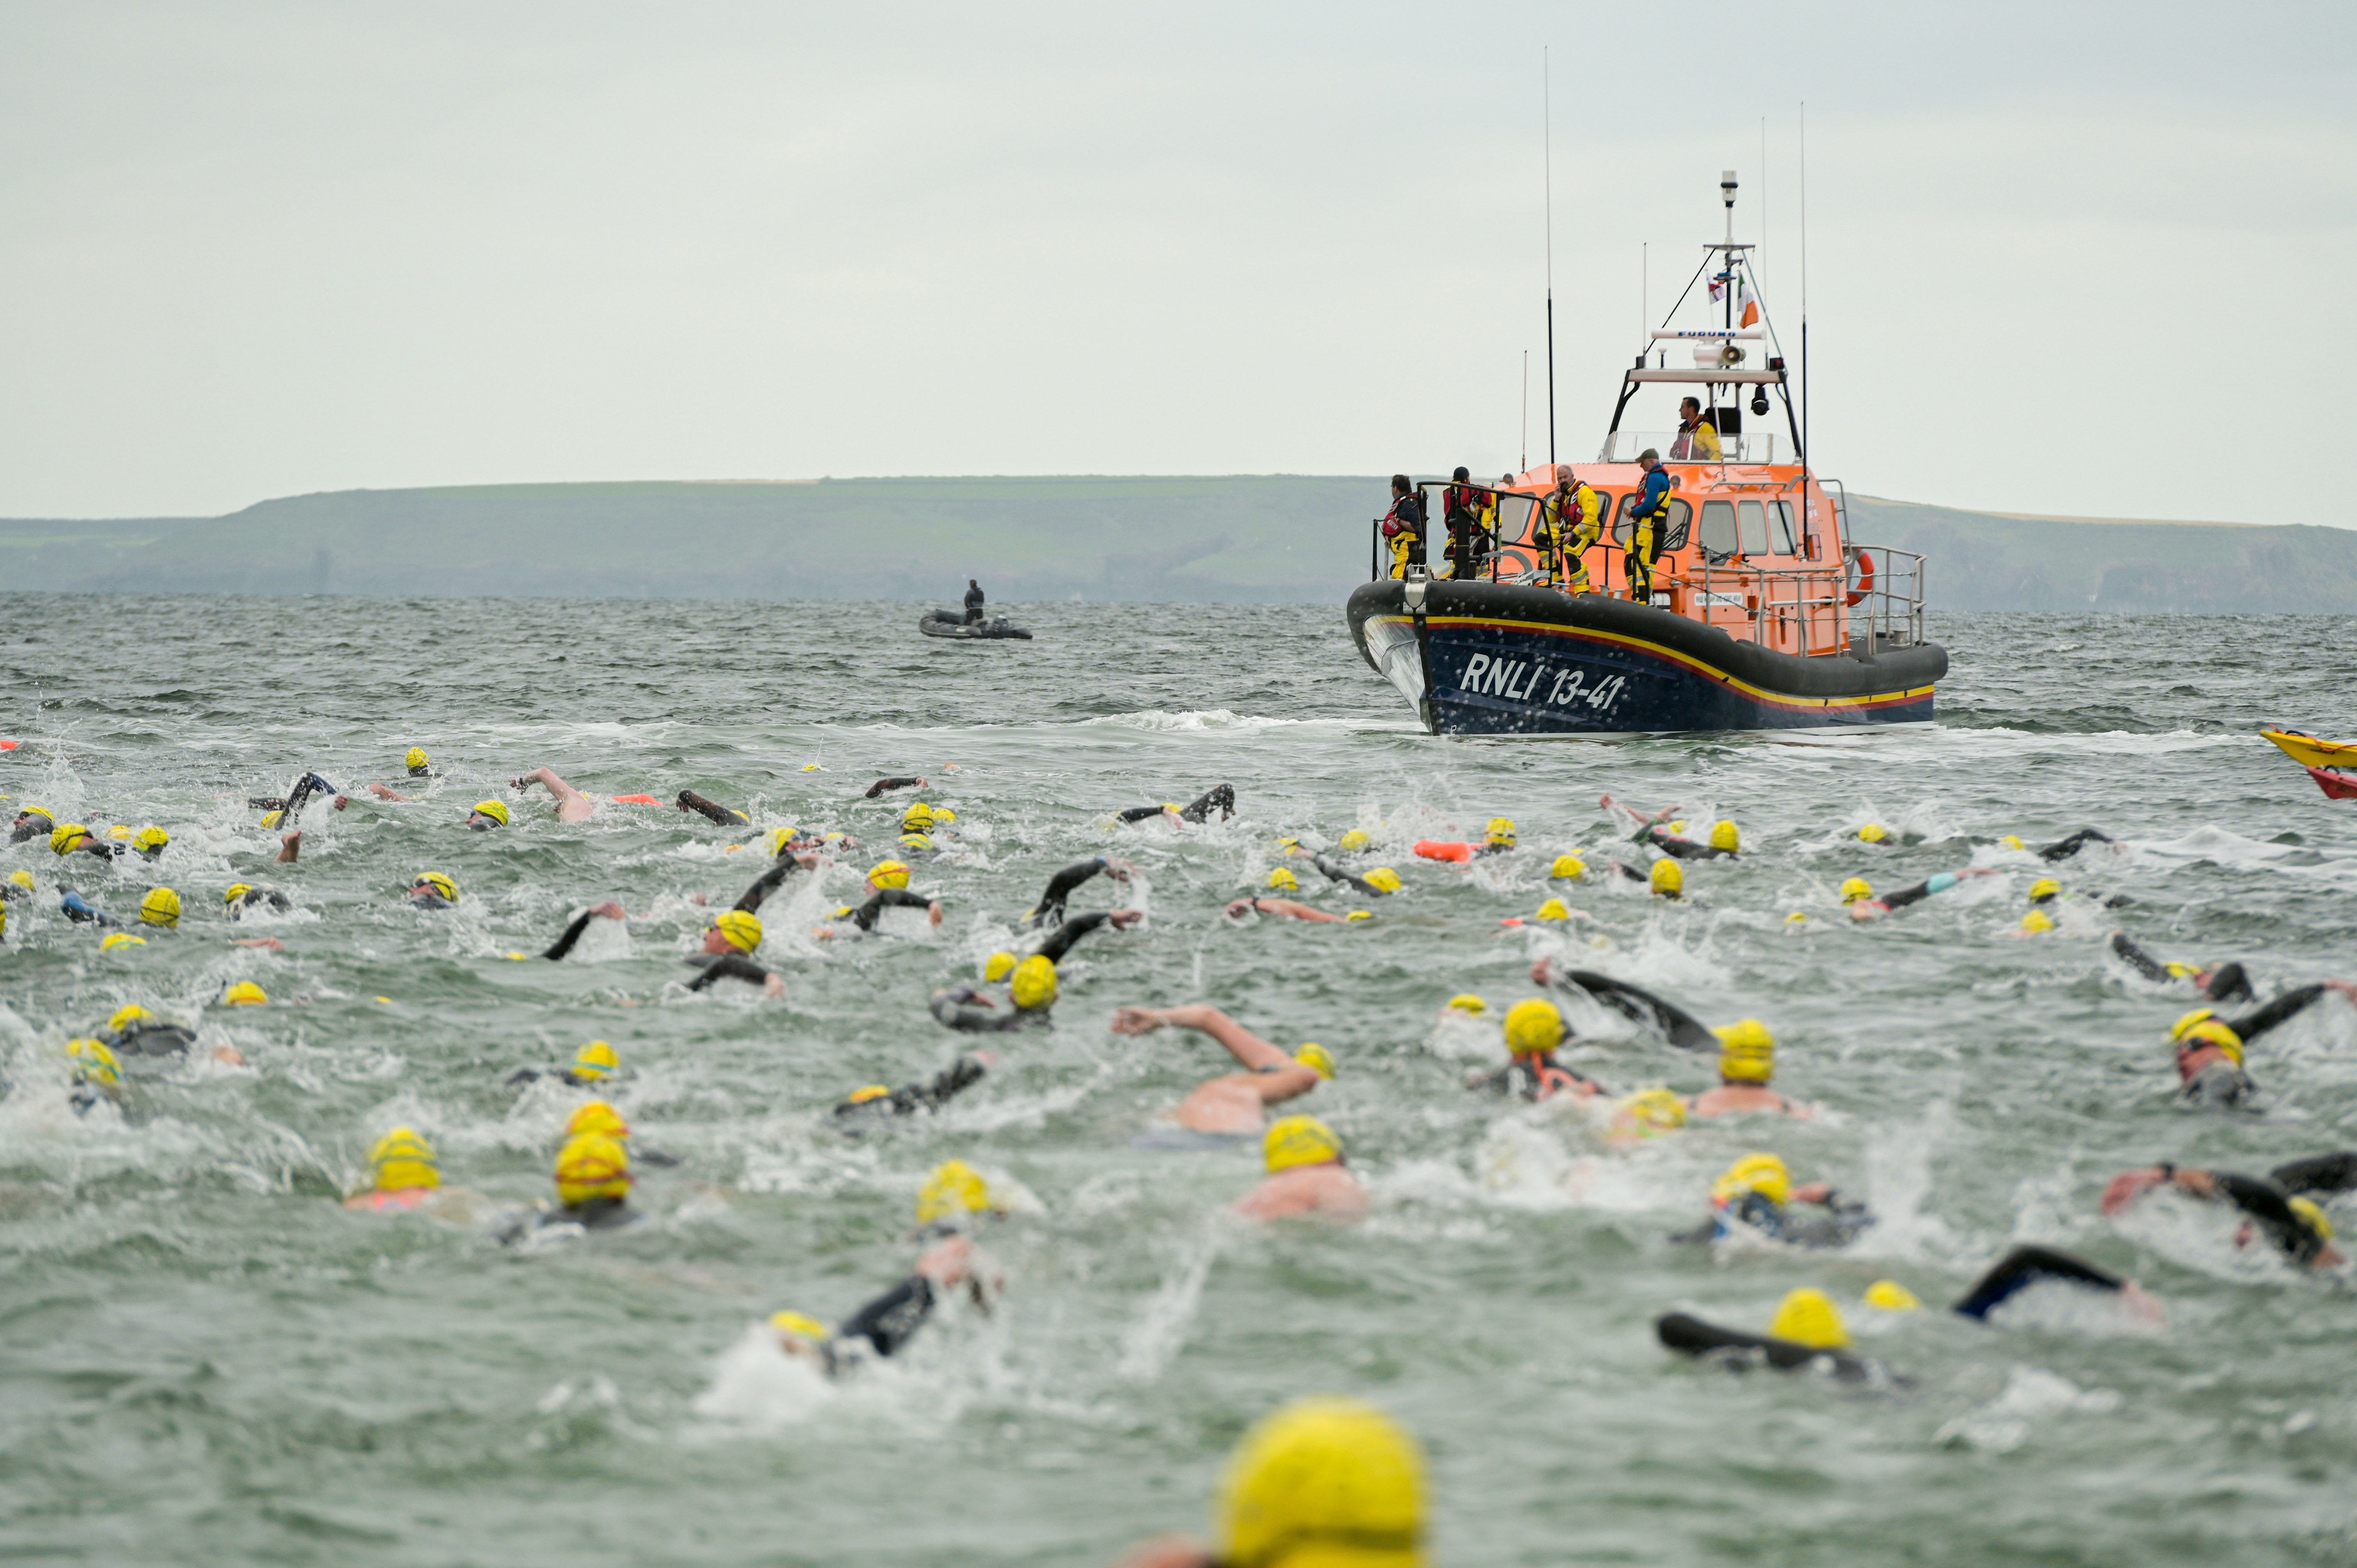 Swimmers take part in an RNLI open water swim, with an RNLI boat in the background